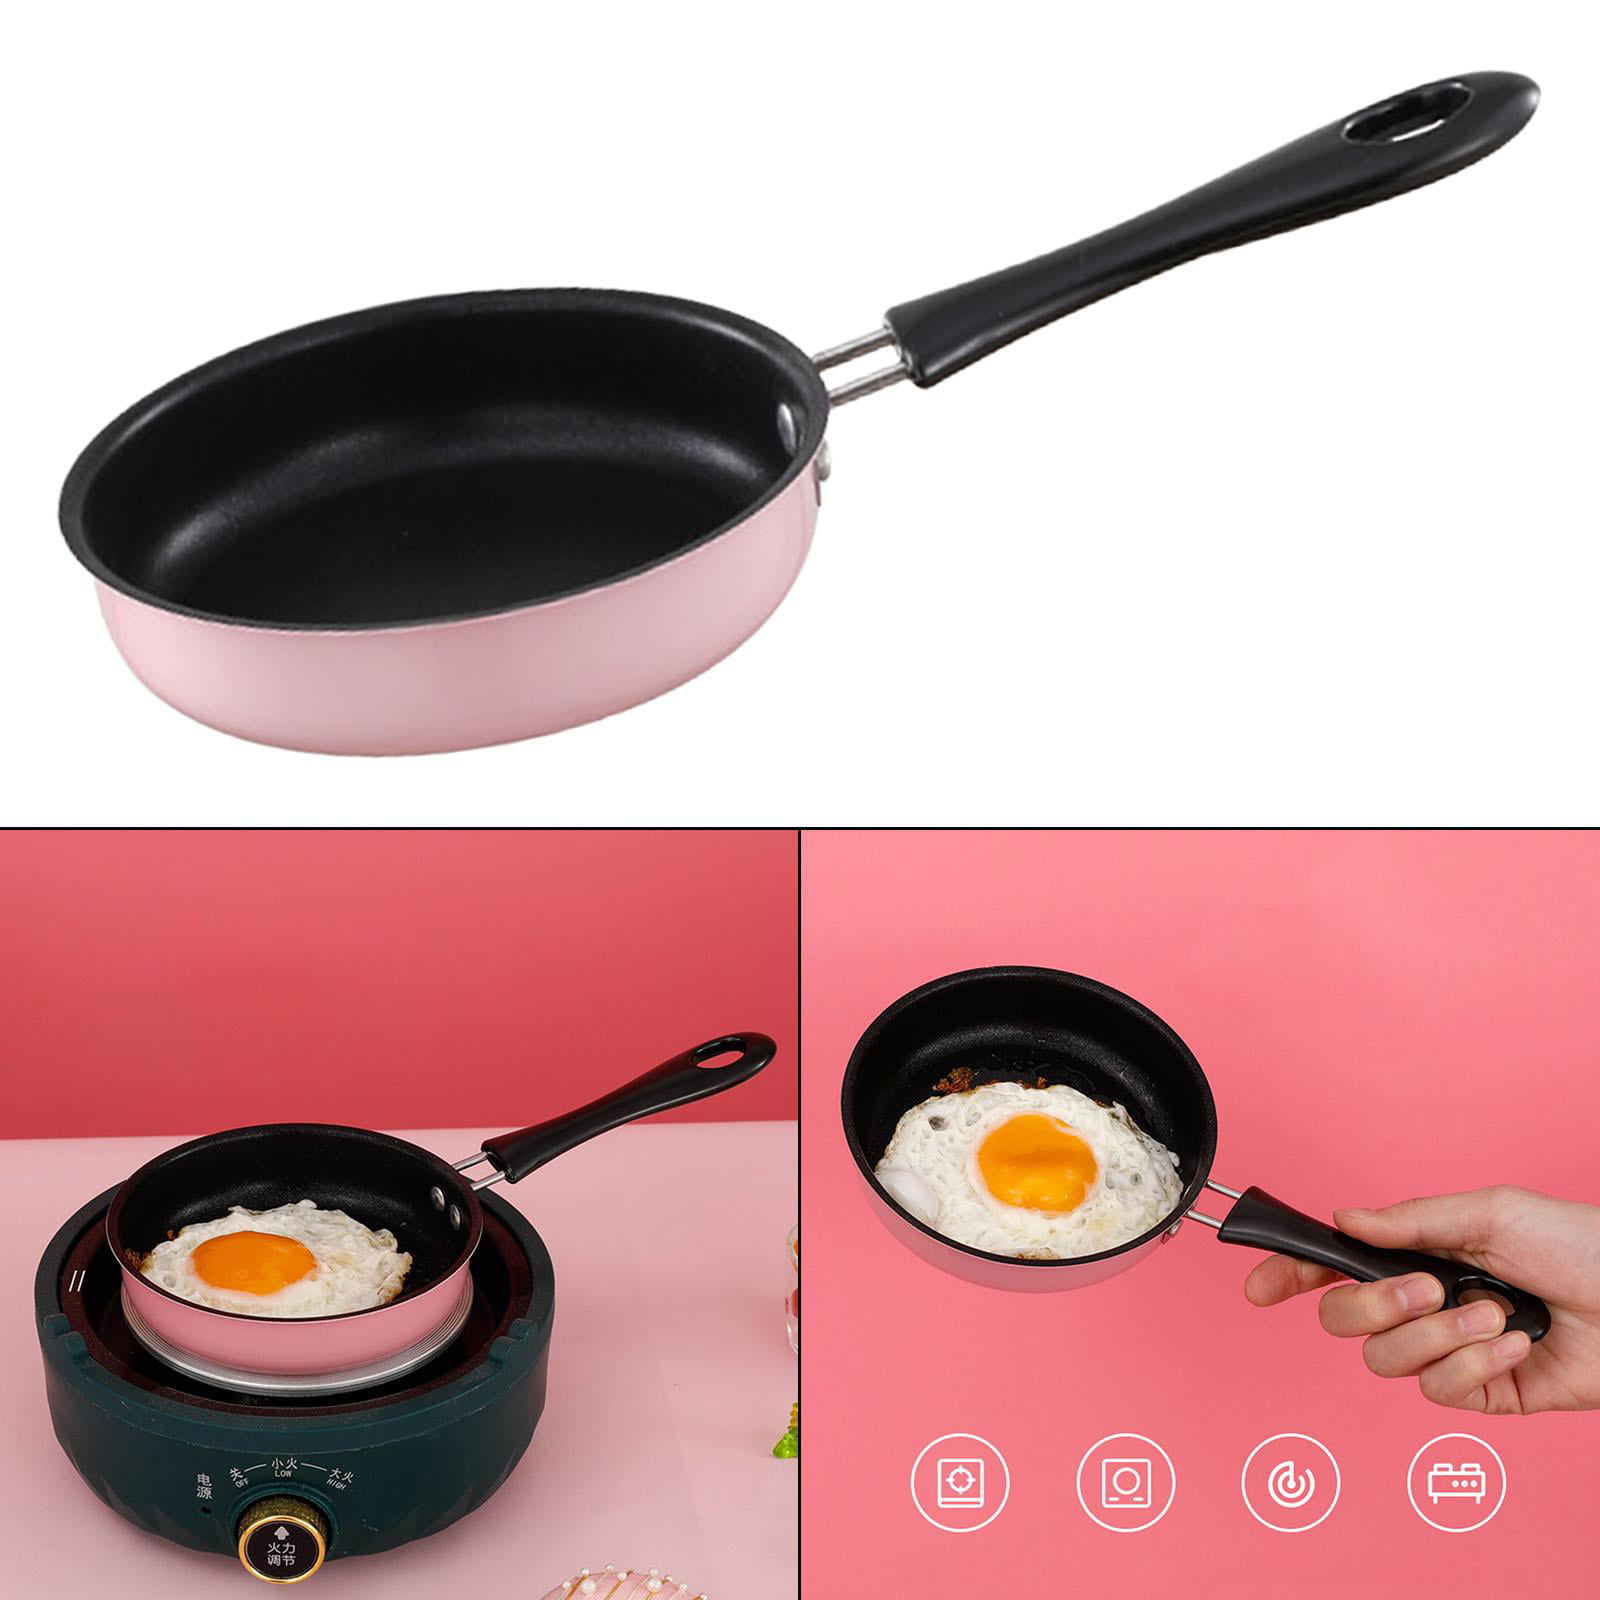 Fry Pan Non Stick Surface Smokeless Kitchen Cookware Small Saute Pan Induction Omelette Pan for Induction Cooker GAS RV Travel, Size: 12.5 cm, Blue